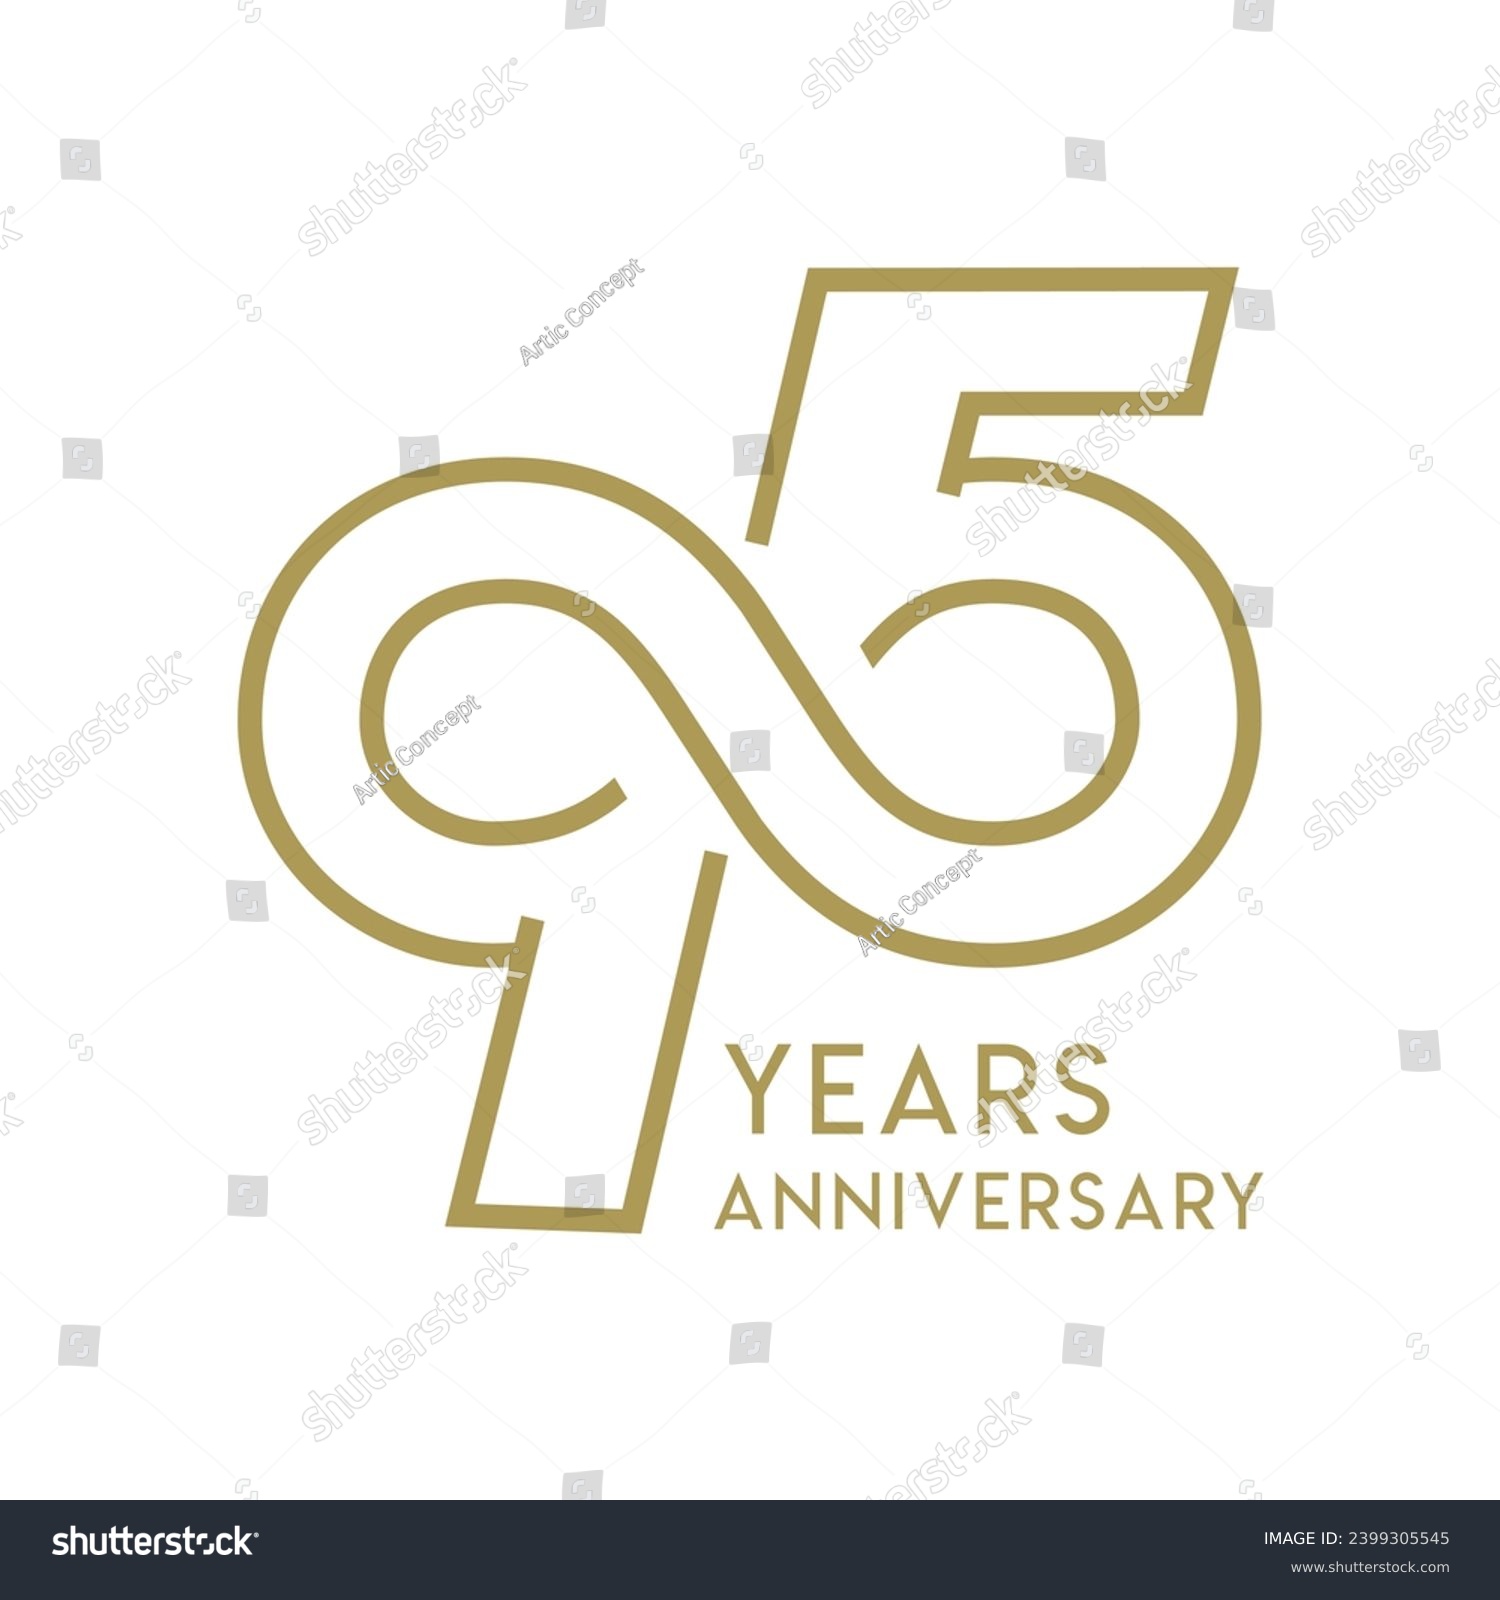 SVG of 95th, 95 Years Anniversary Logo, Golden Color, Vector Template Design element for birthday, invitation, wedding, jubilee and greeting card illustration. svg